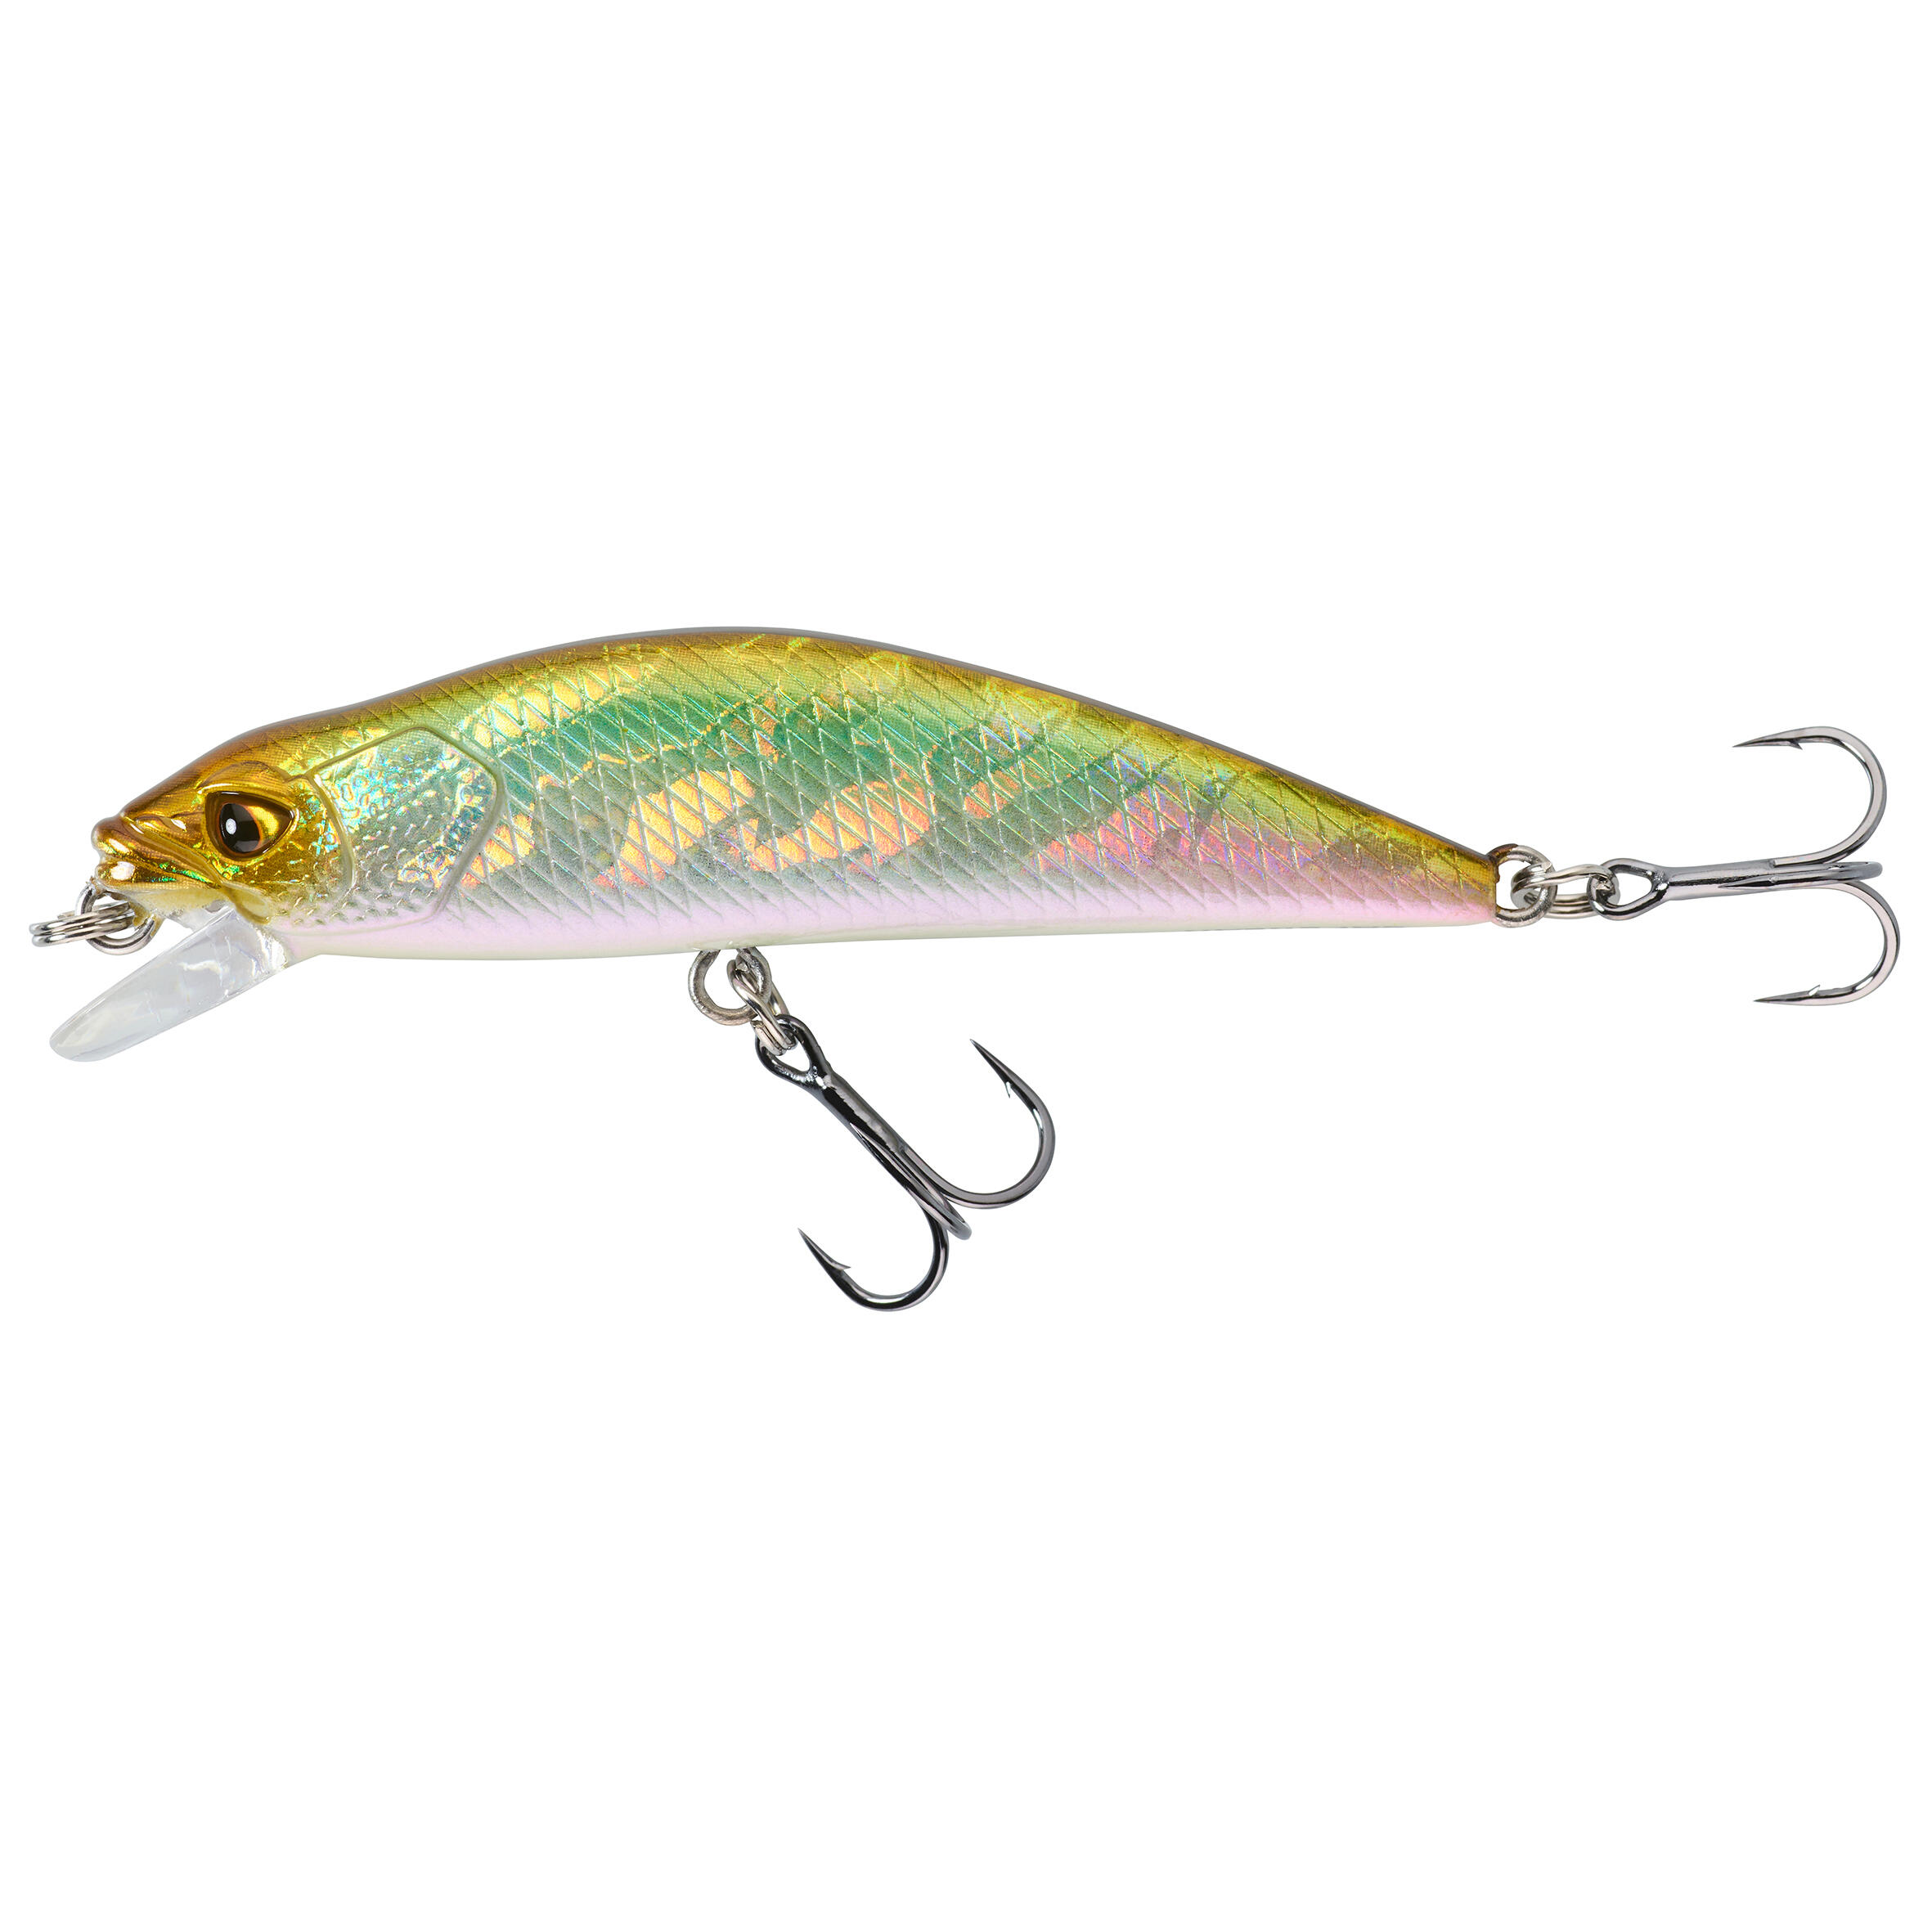 MINNOW HARD LURE FOR TROUT WXM  MNWFS 50 US - GREEN BACK 1/2